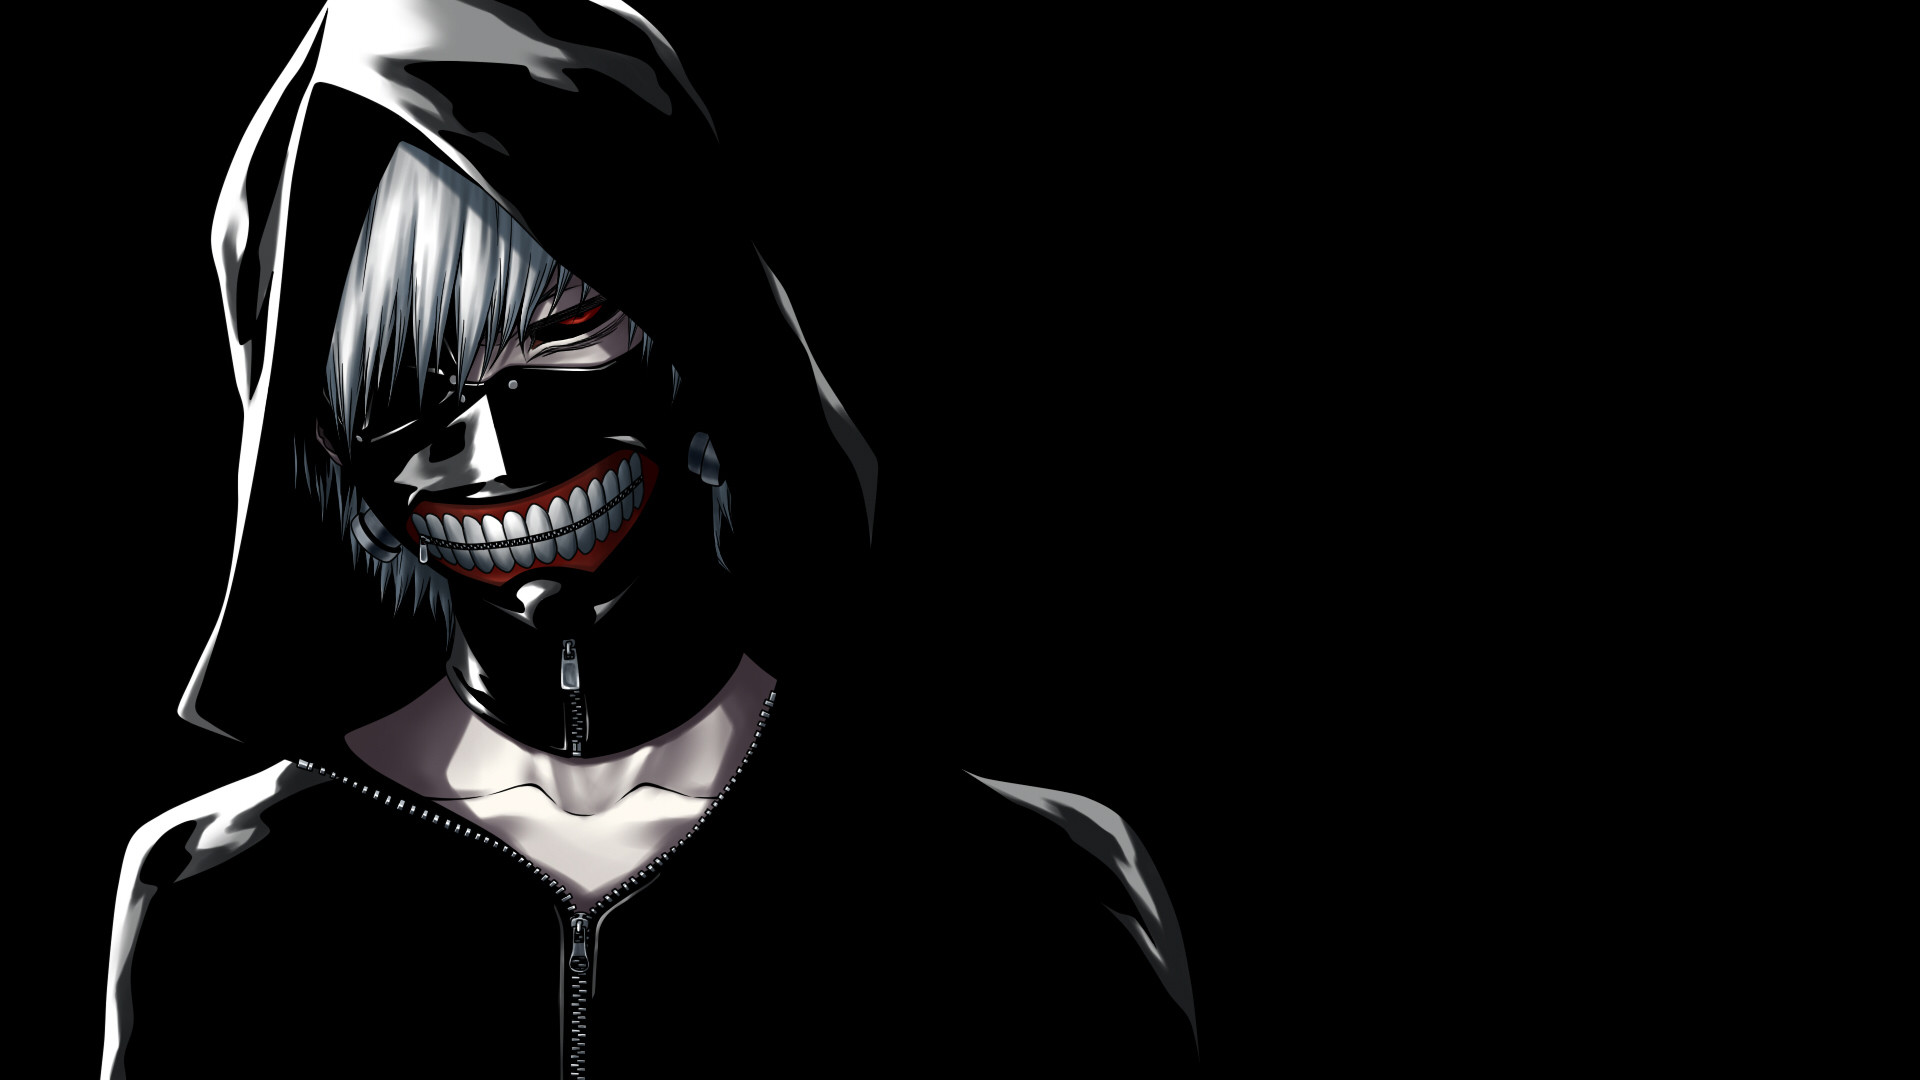 Tokyo Ghoul Wallpapers Hd 63 Images